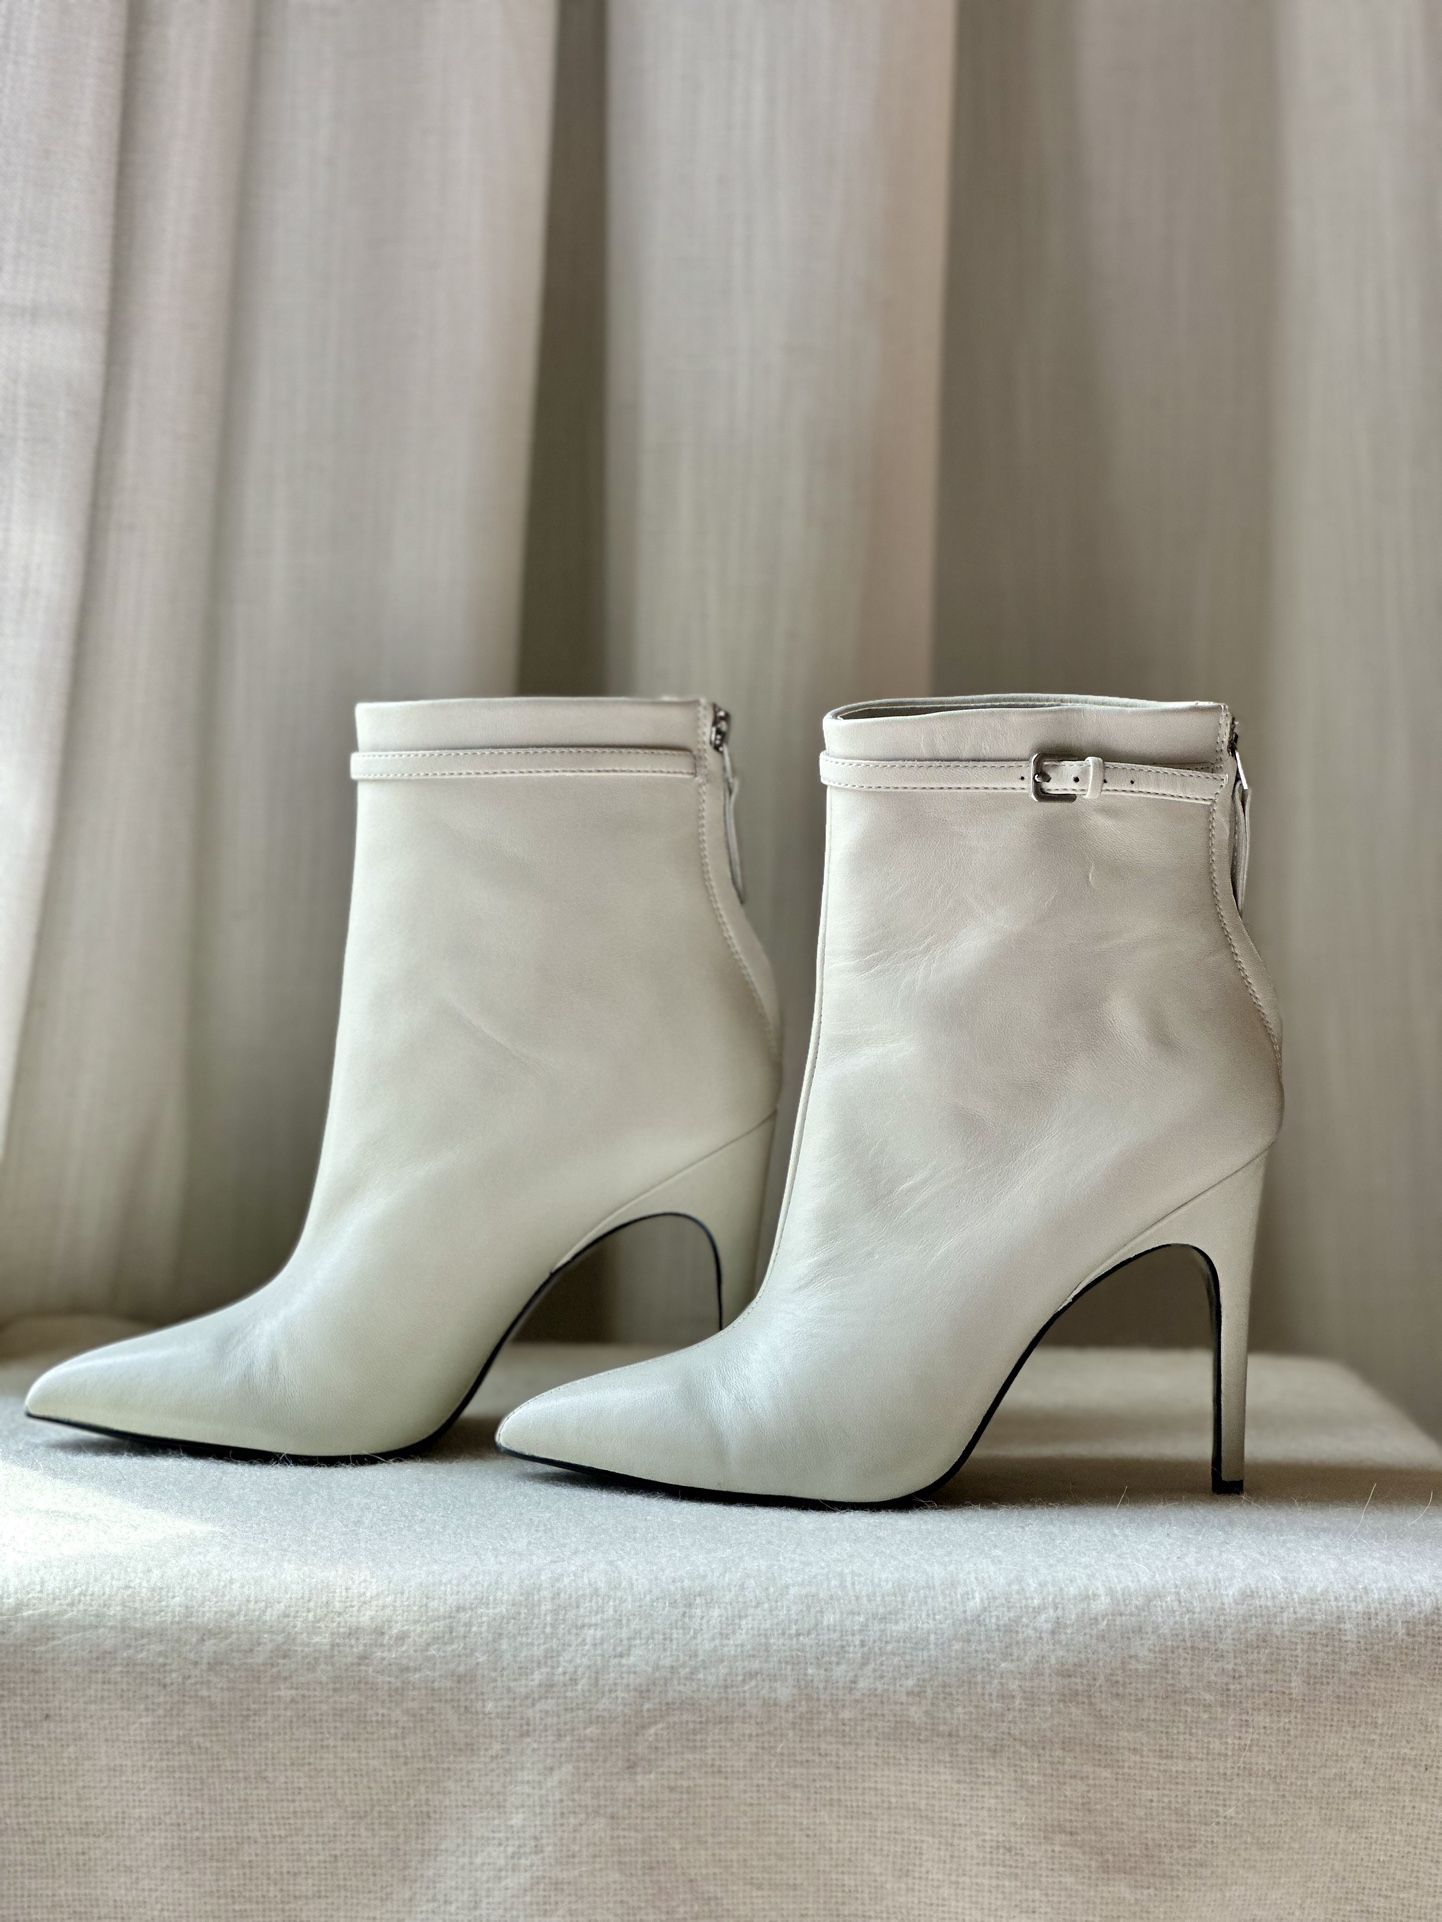 Authentic Reiss Ashton Leather Off White Ankle Boots